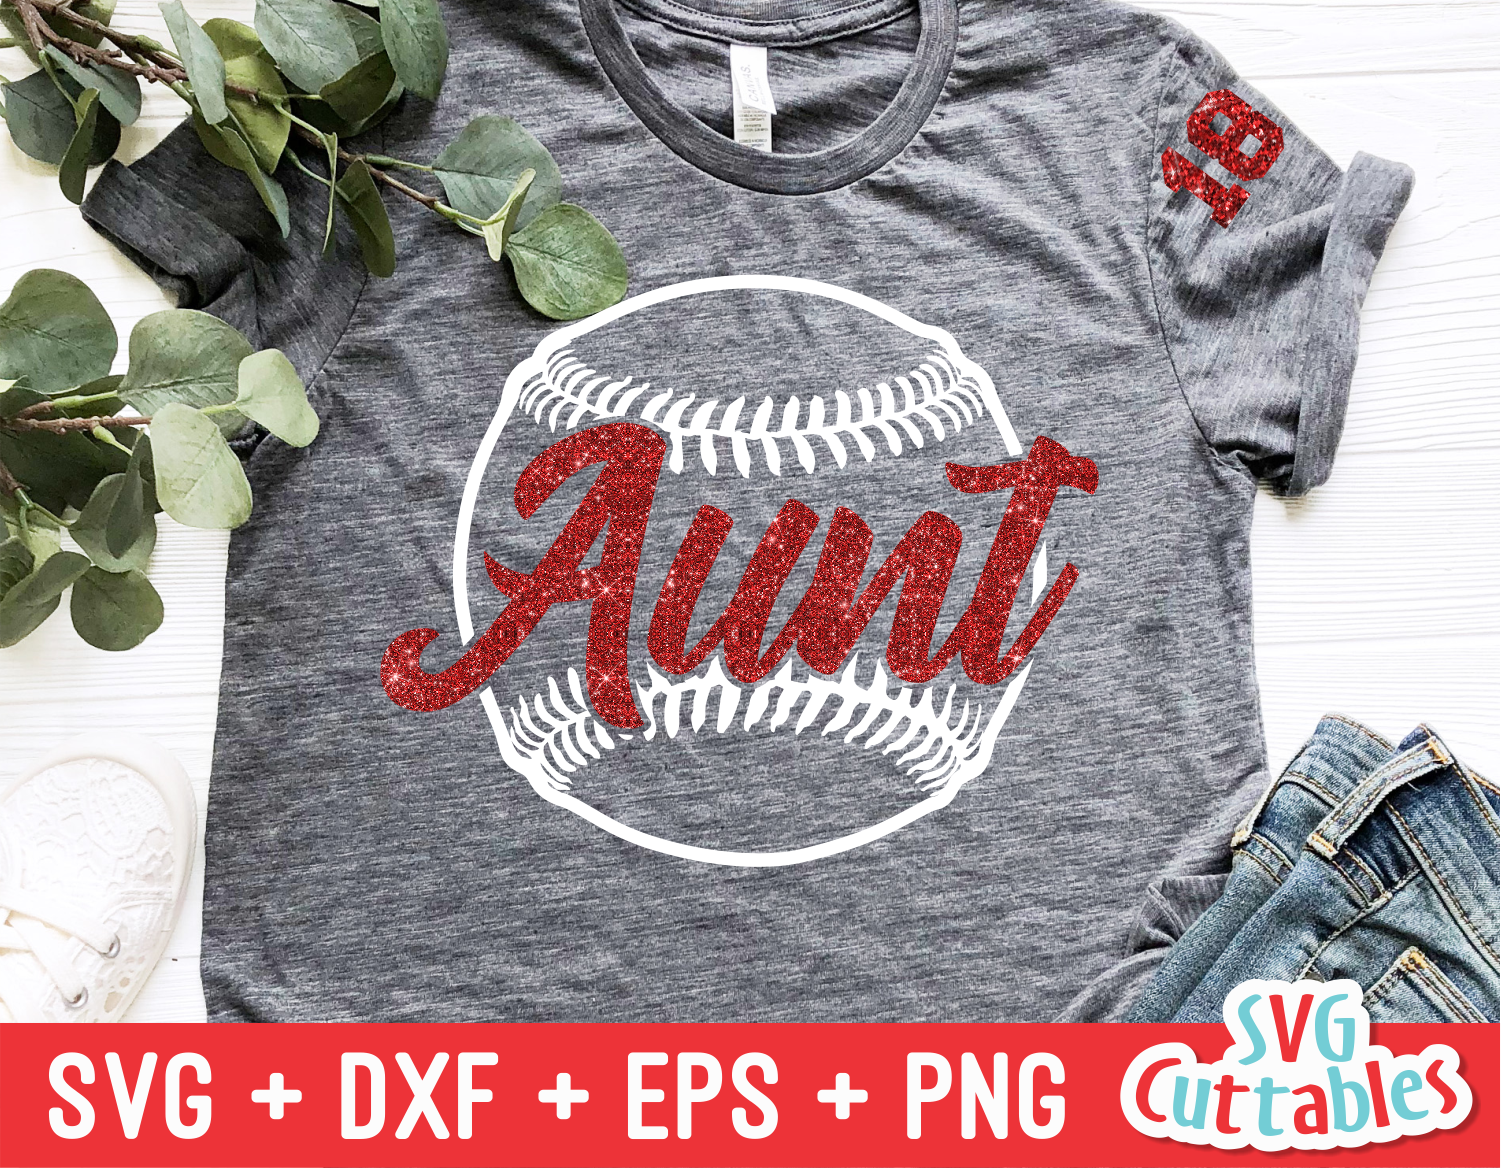 Download Baseball Aunt Svg Auntie Cutting Files Aunt Silhouette And Cricut Files Baseball Svg Baseball Aunt Svg Baseball Aunt Shirt Svg Auntie Clip Art Art Collectibles Poligon Com